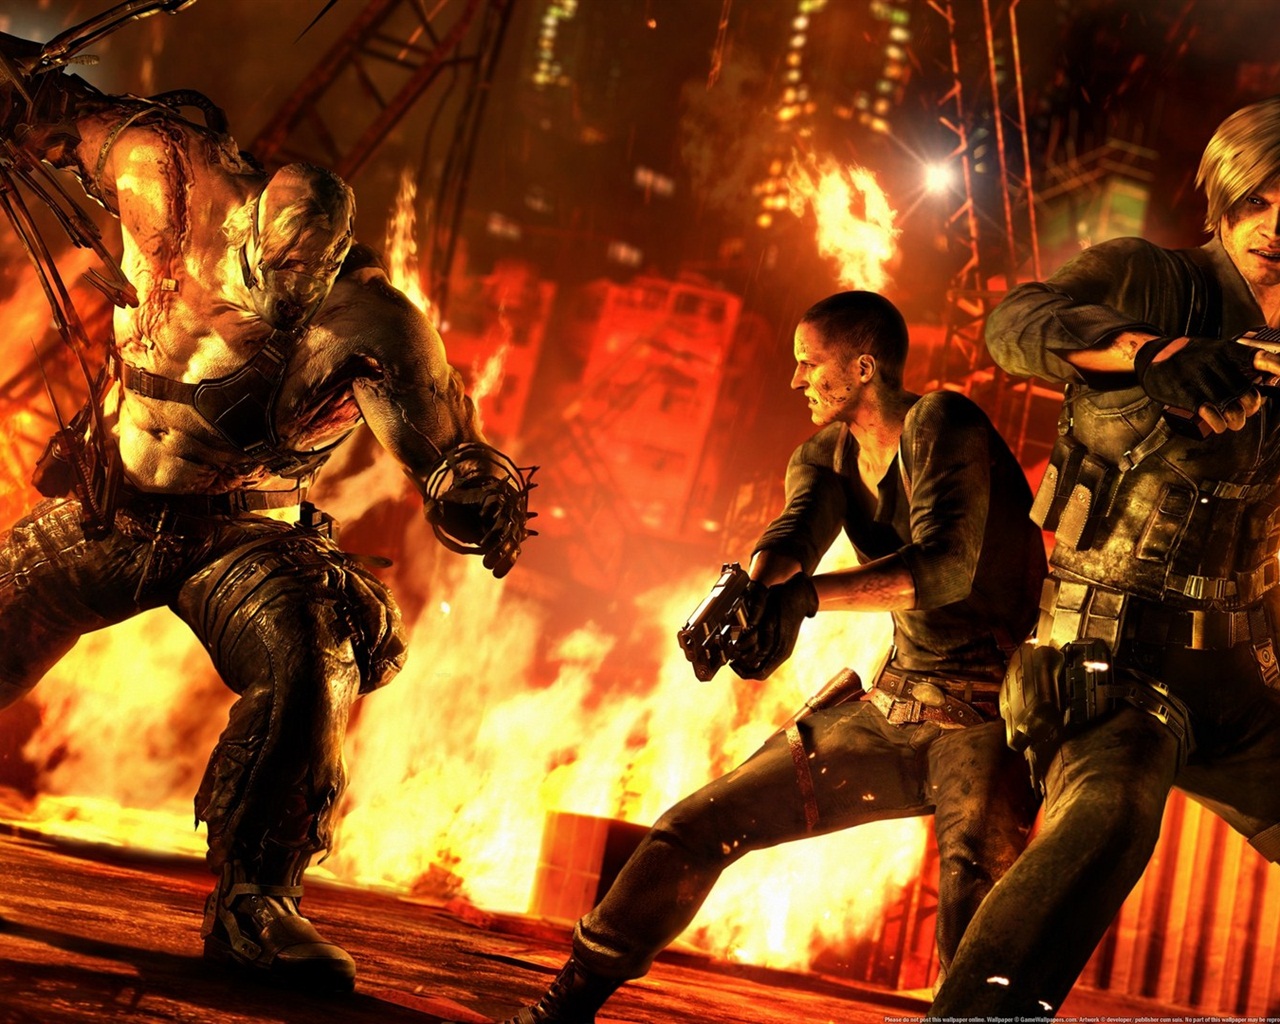 Resident Evil 6 HD game wallpapers #15 - 1280x1024